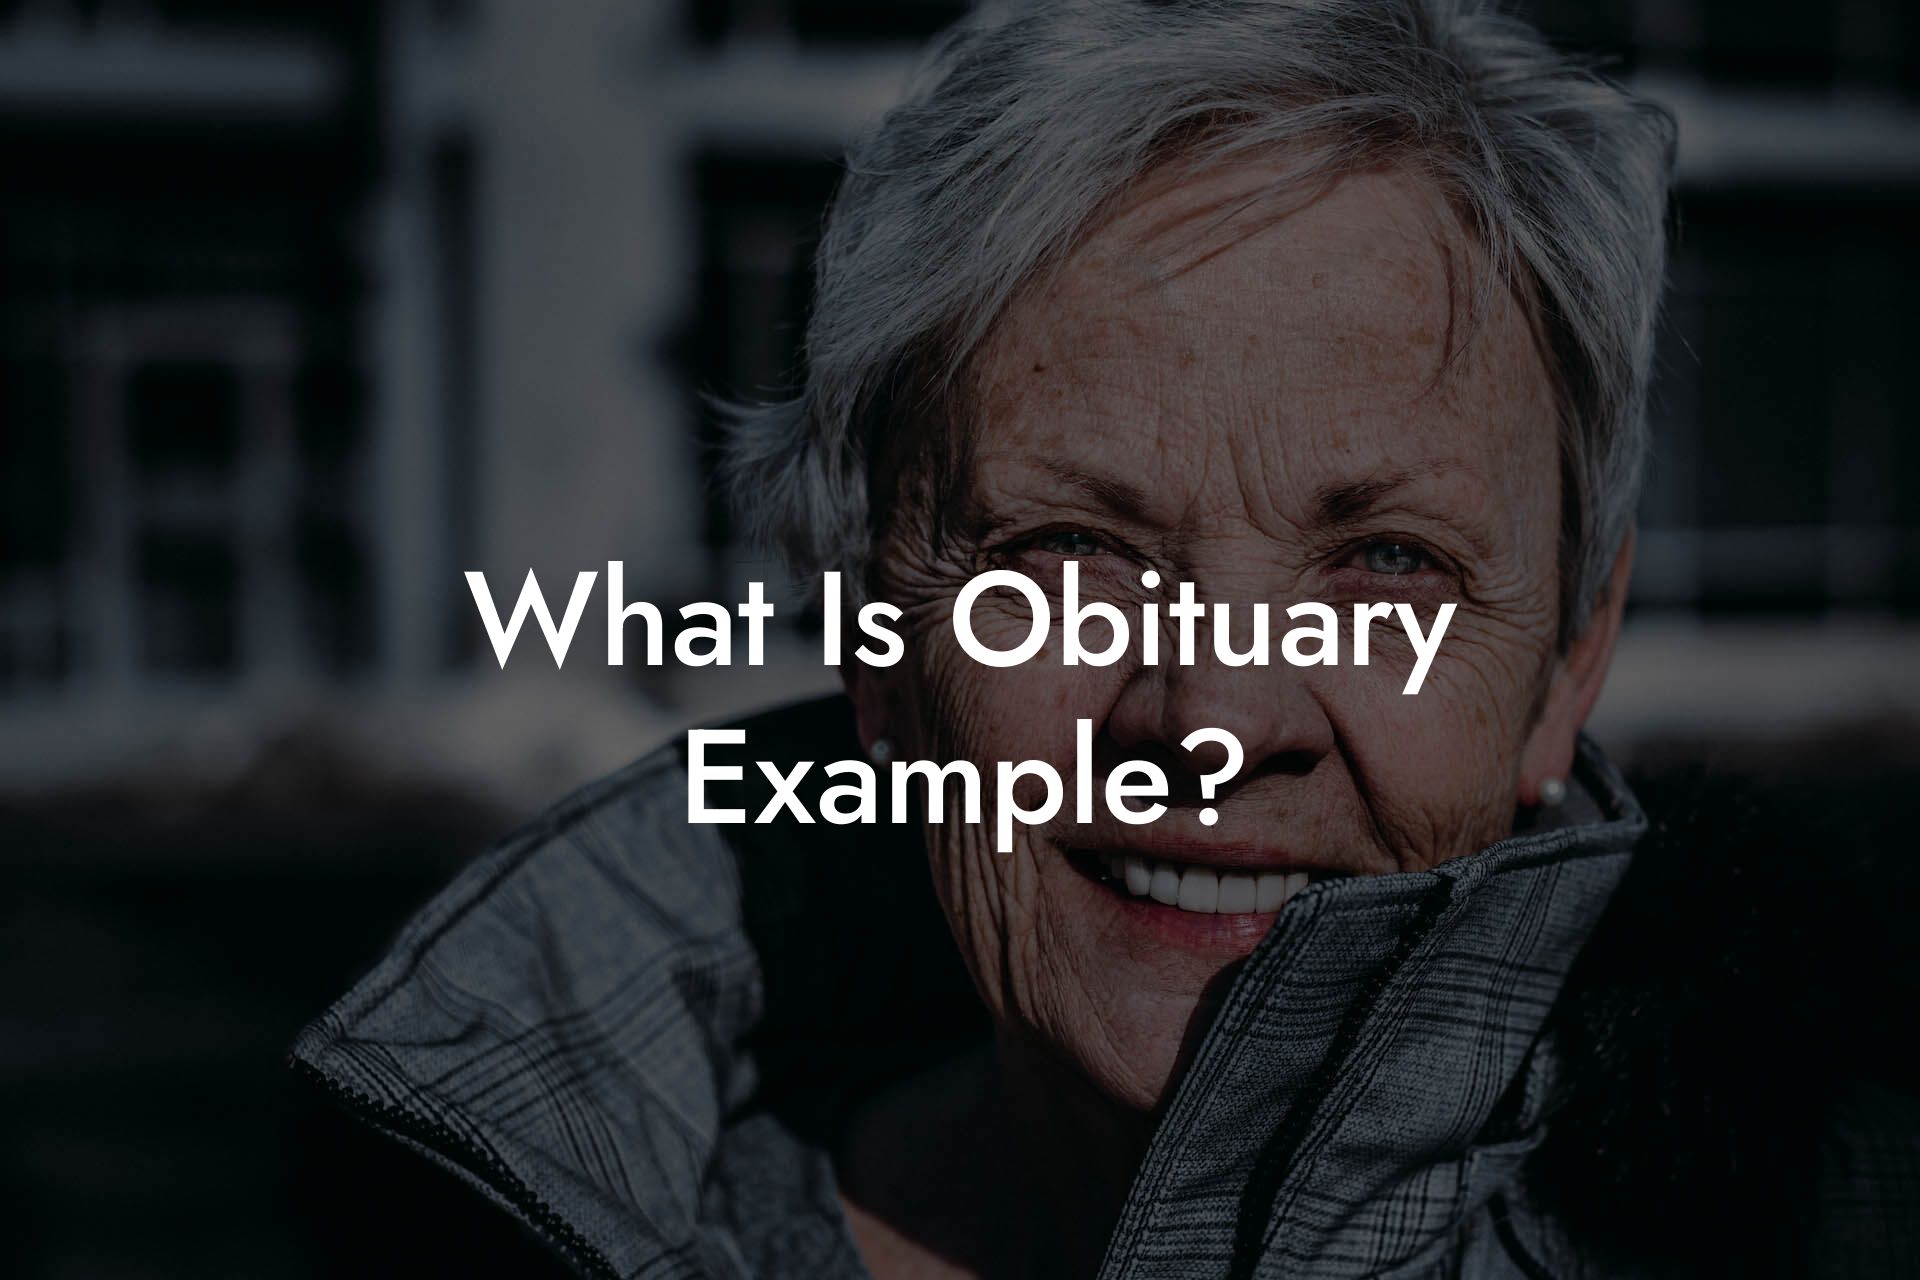 What Is Obituary Example?